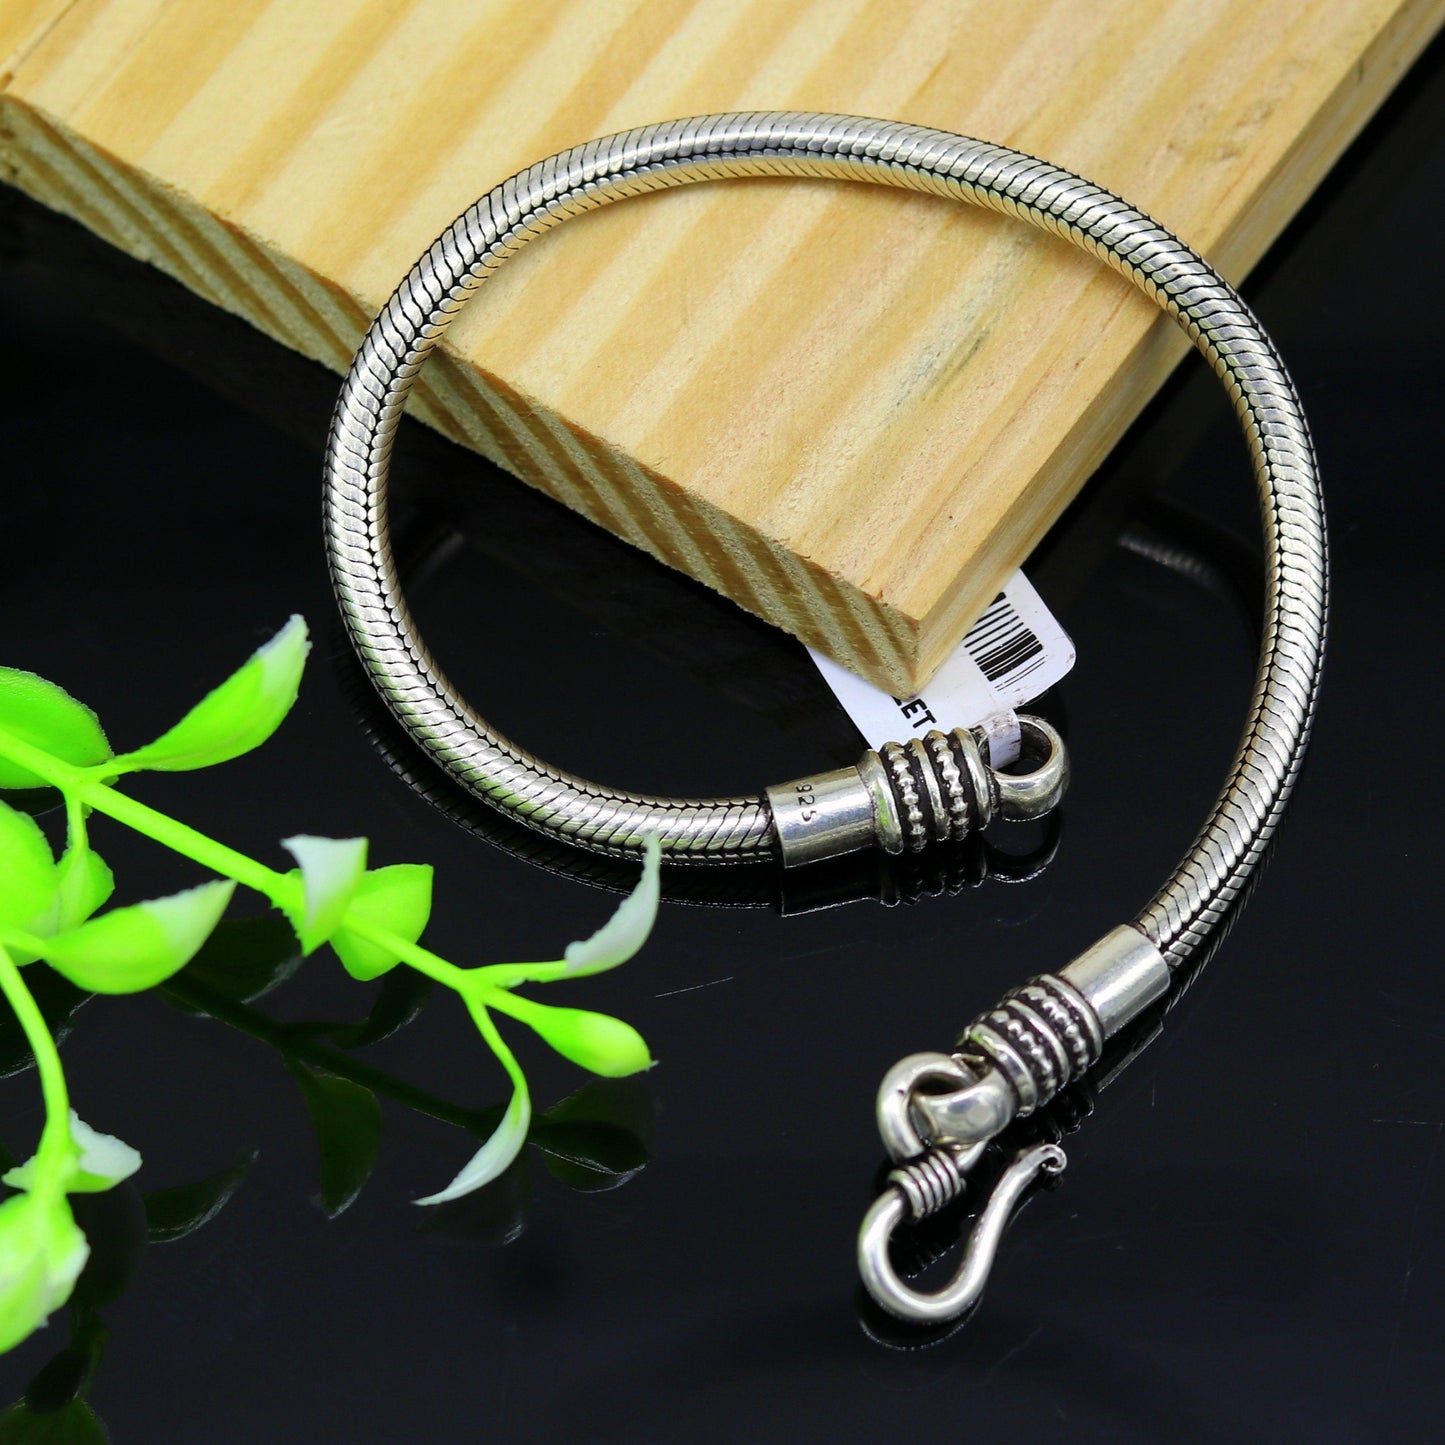 8.5" long 925 sterling silver handmade gorgeous snake chain flexible customized bracelet unisex personalized gift tribal jewelry nsbr39 - TRIBAL ORNAMENTS